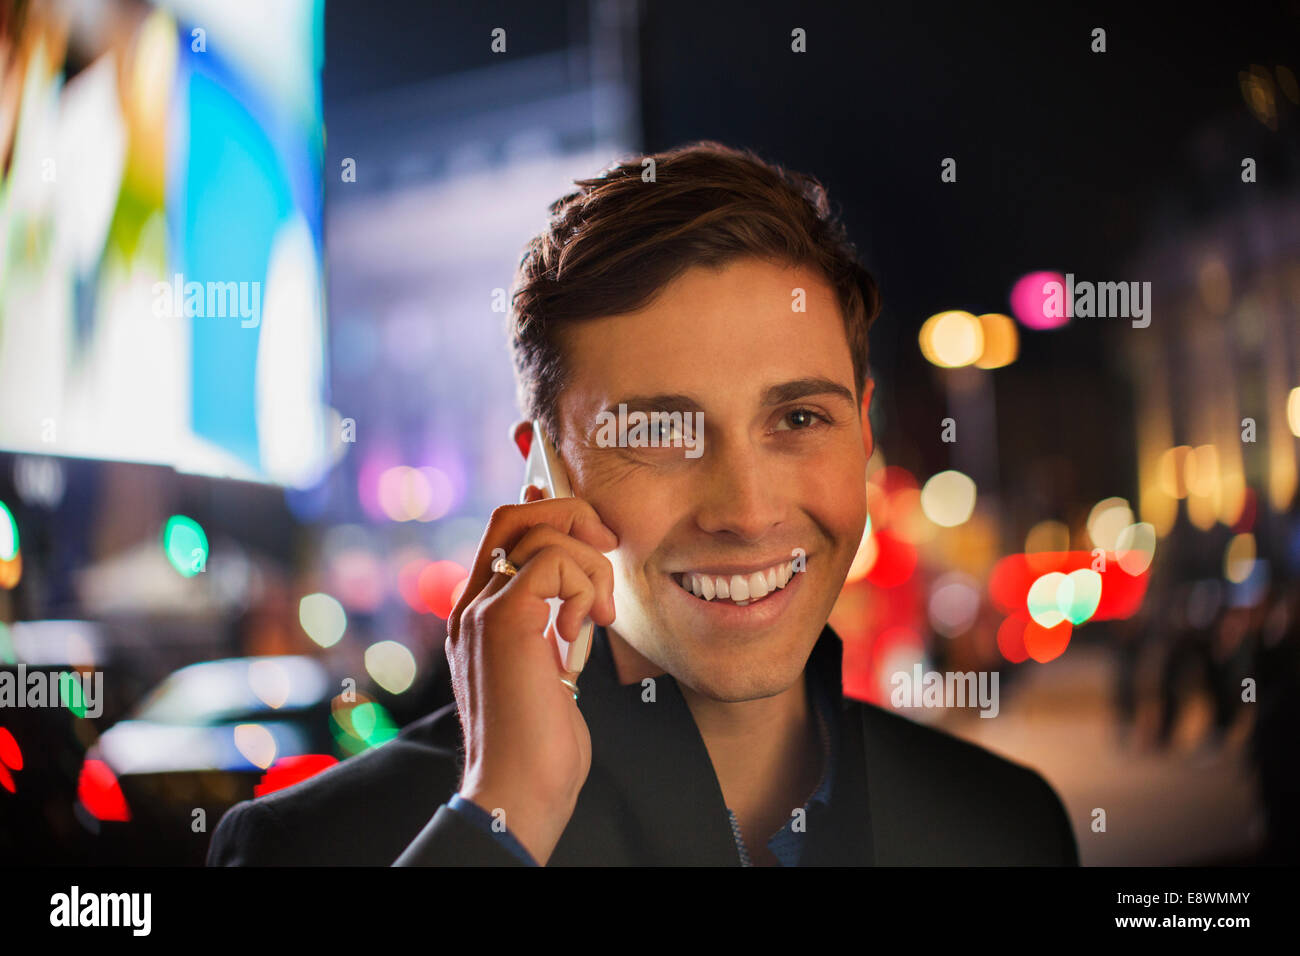 Man talking on cell phone on city street at night Banque D'Images